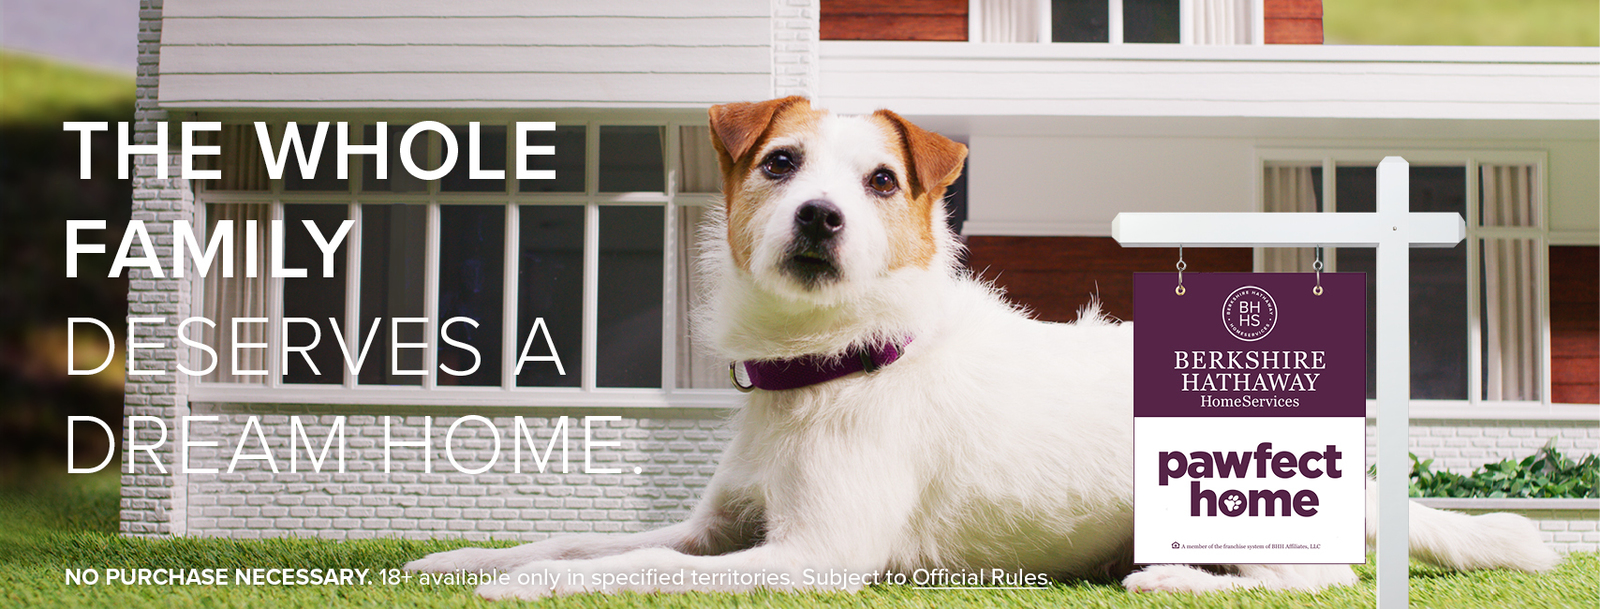 Pawfect Home Sweepstakes Facebook Cover - Square Sign